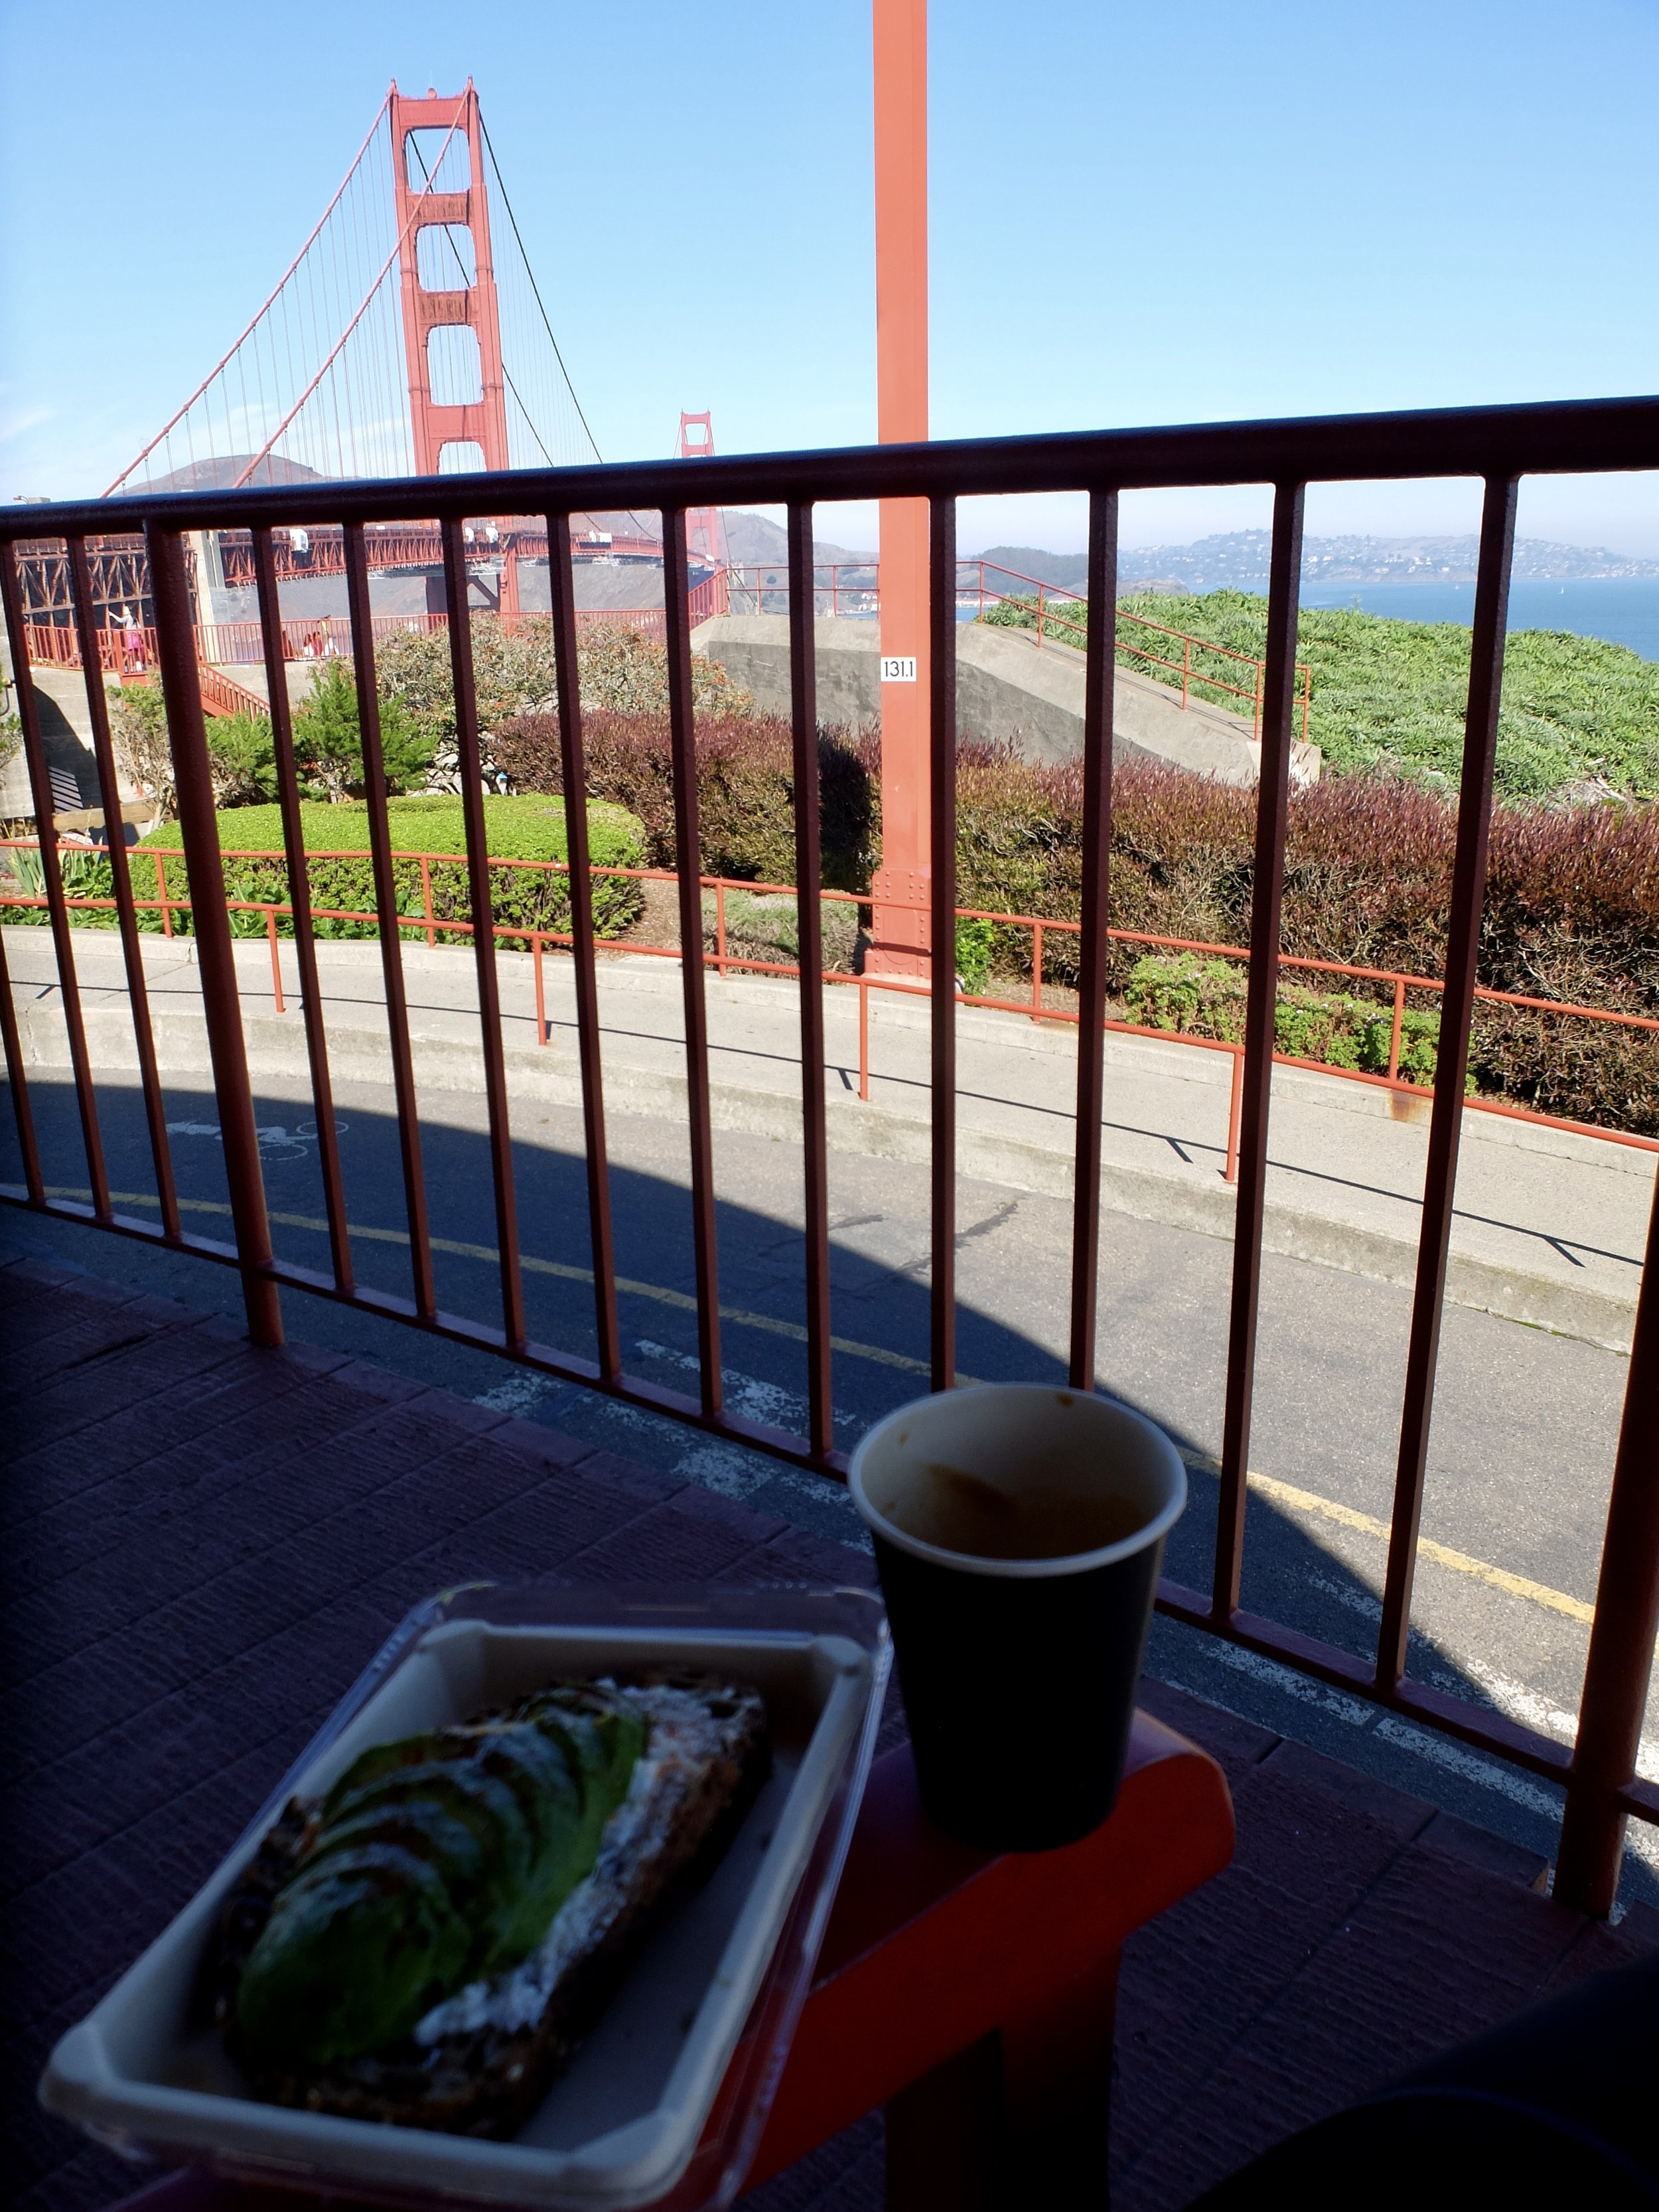 ...lunch &amp; coffee at the new Equator Coffees Round House Cafe Golden Gate Bridge Plaza.